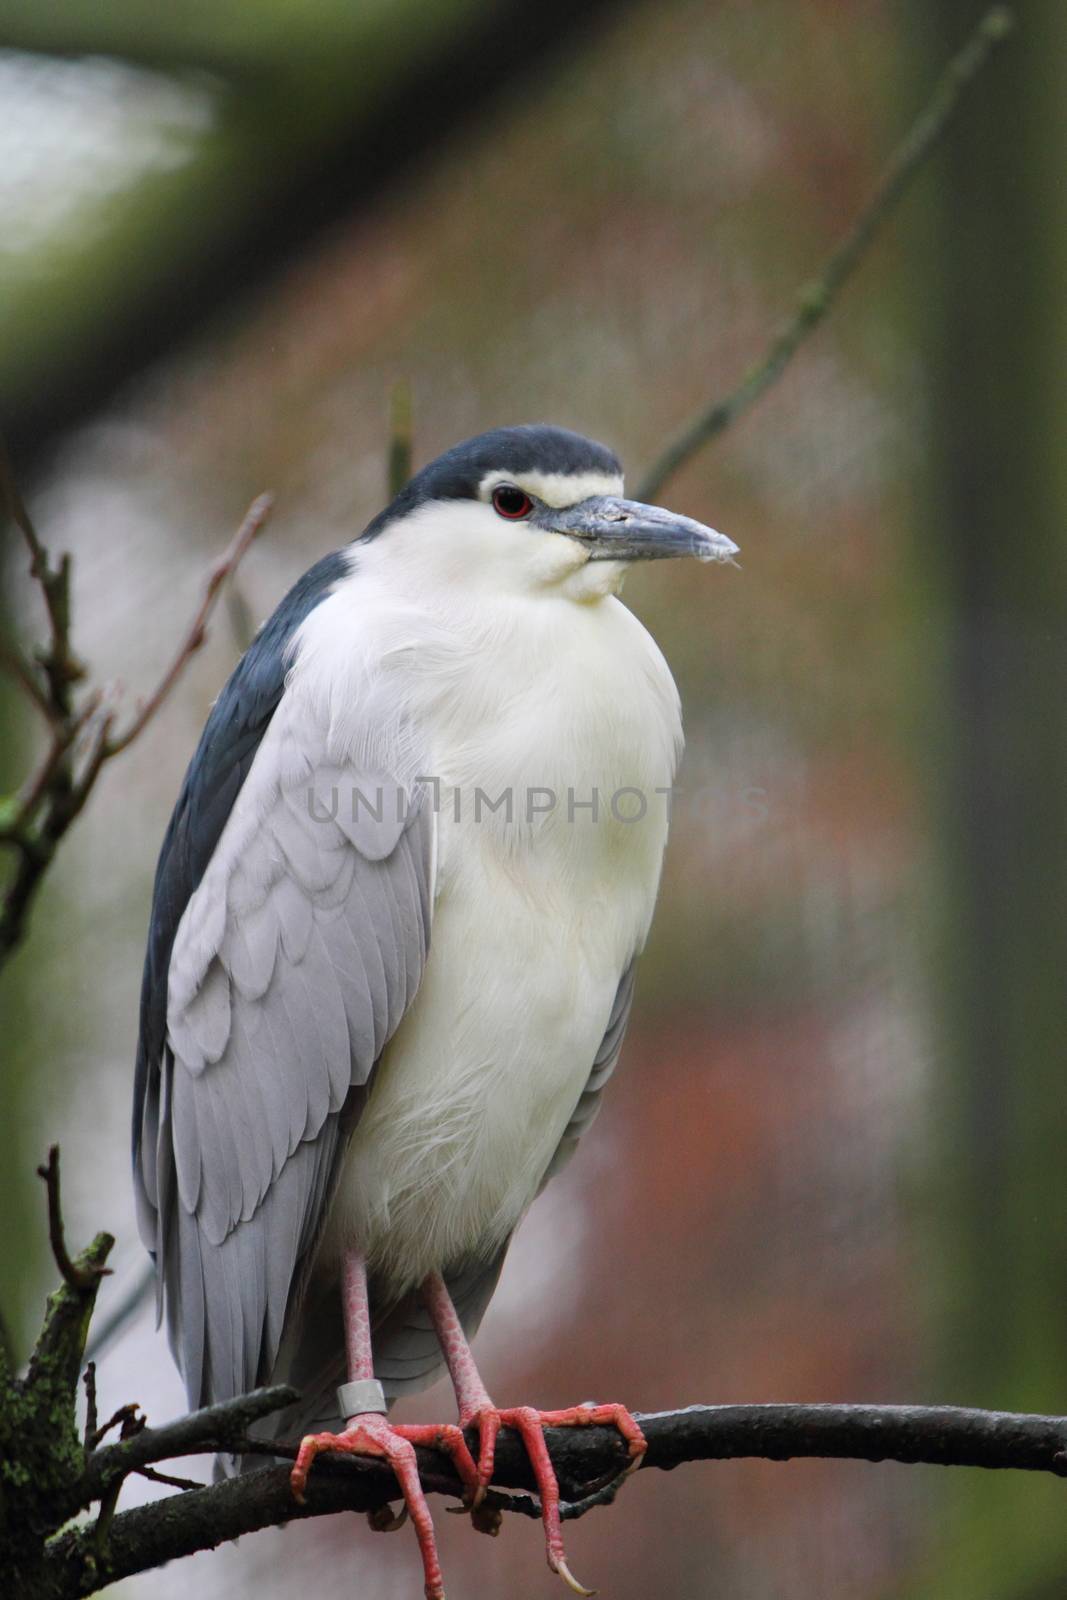 Black crowned night heron( Nycticorax nycticorax ) by mitzy